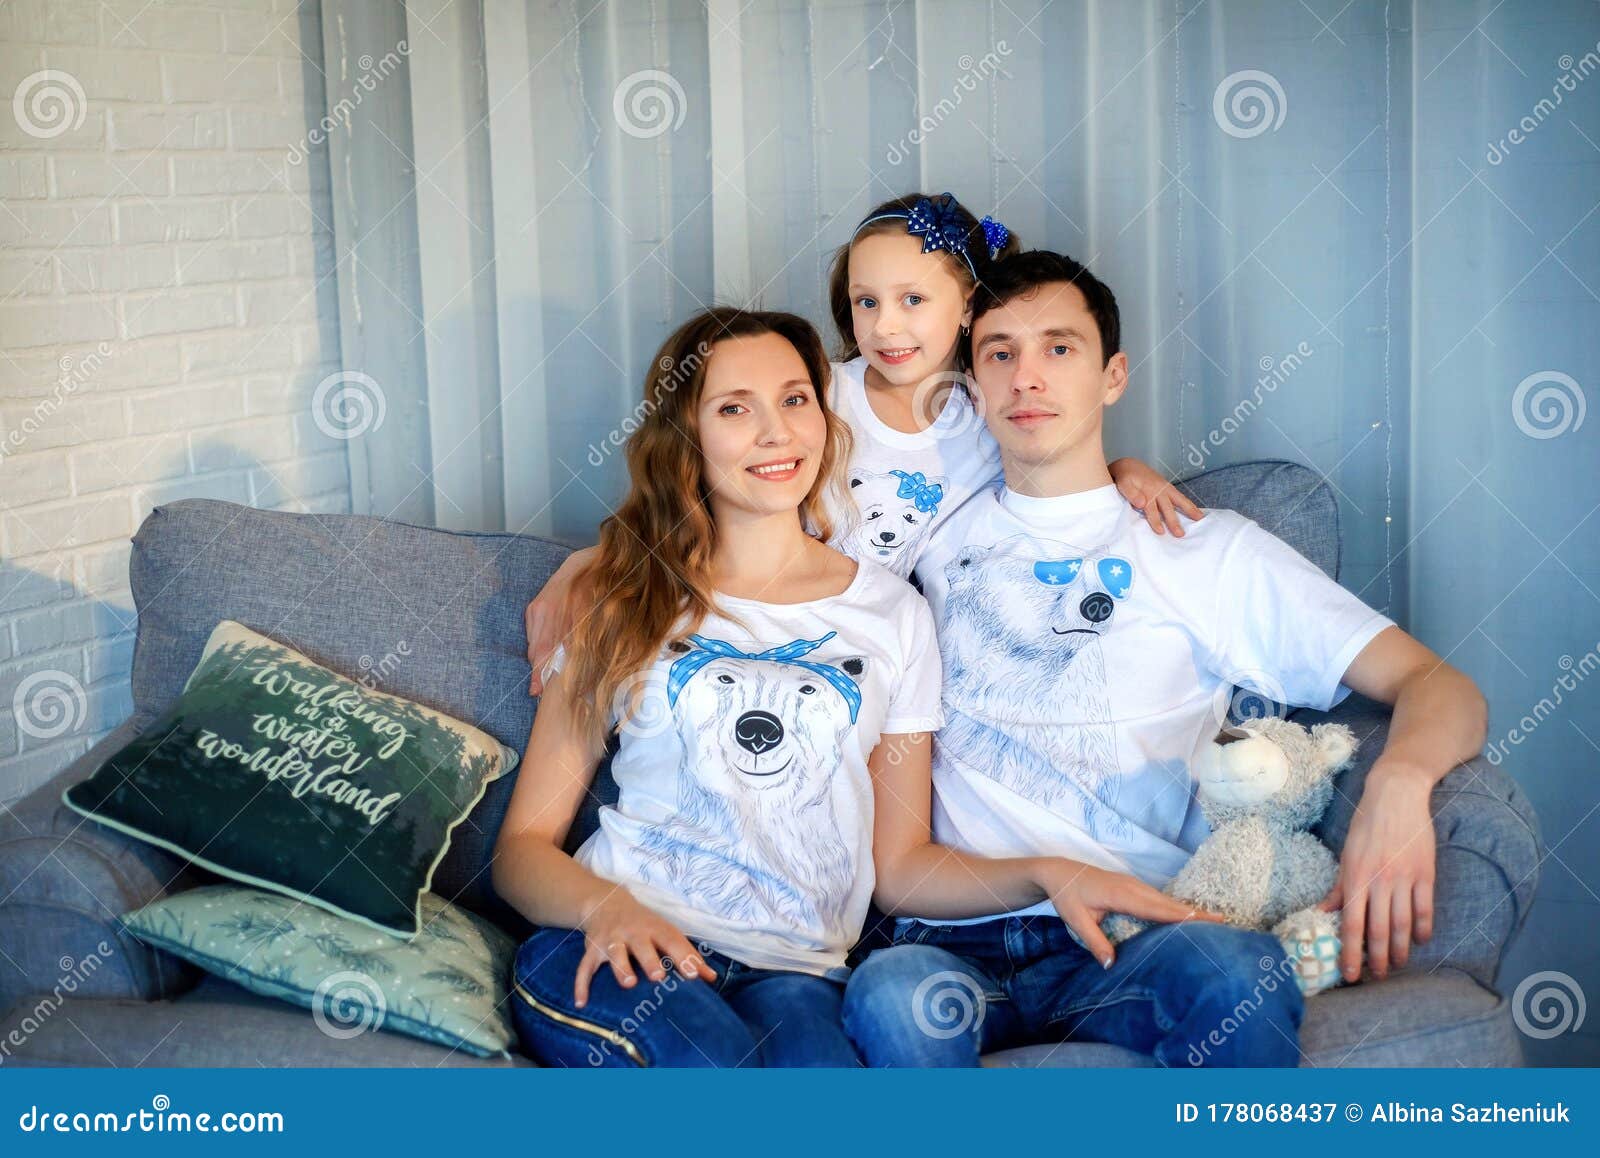 Sweet Little Girl Together With Beautiful Young Mom And Dad Sitting On